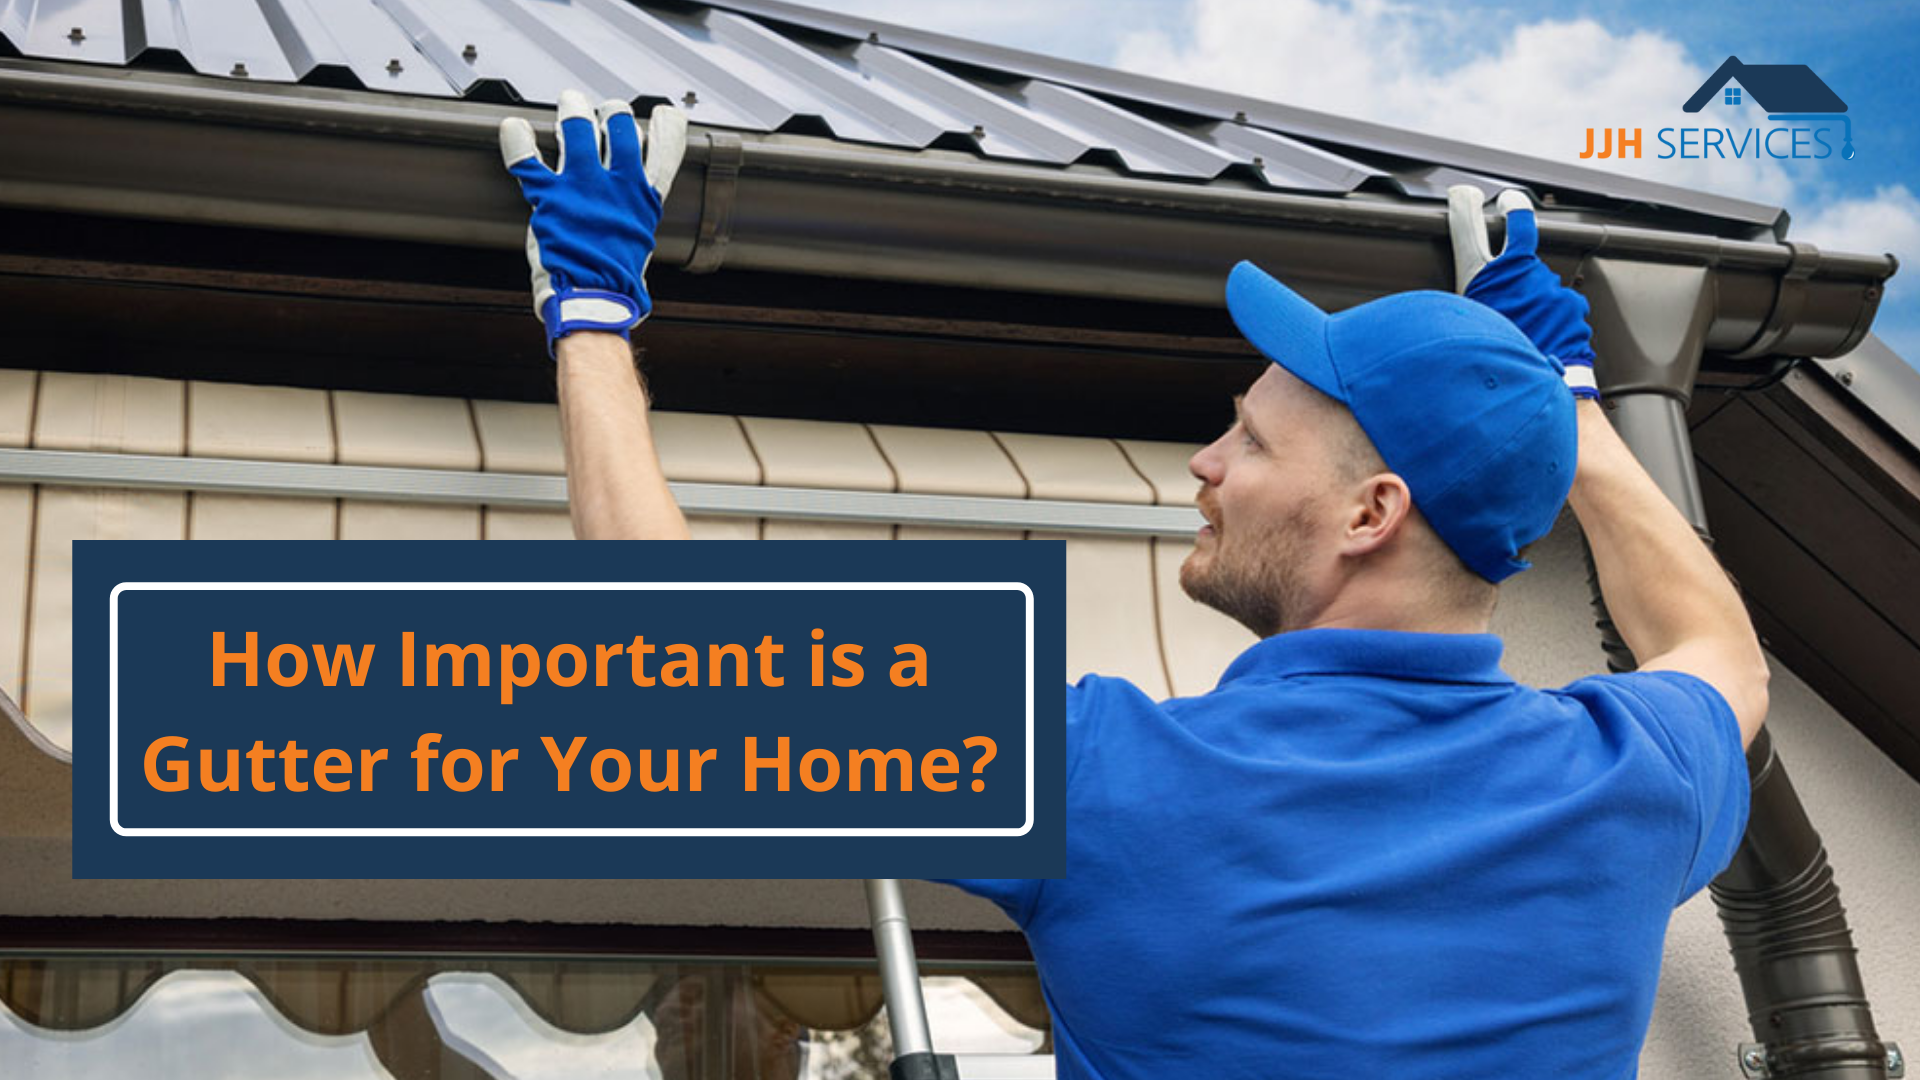 How Important is a Gutter for Your Home?